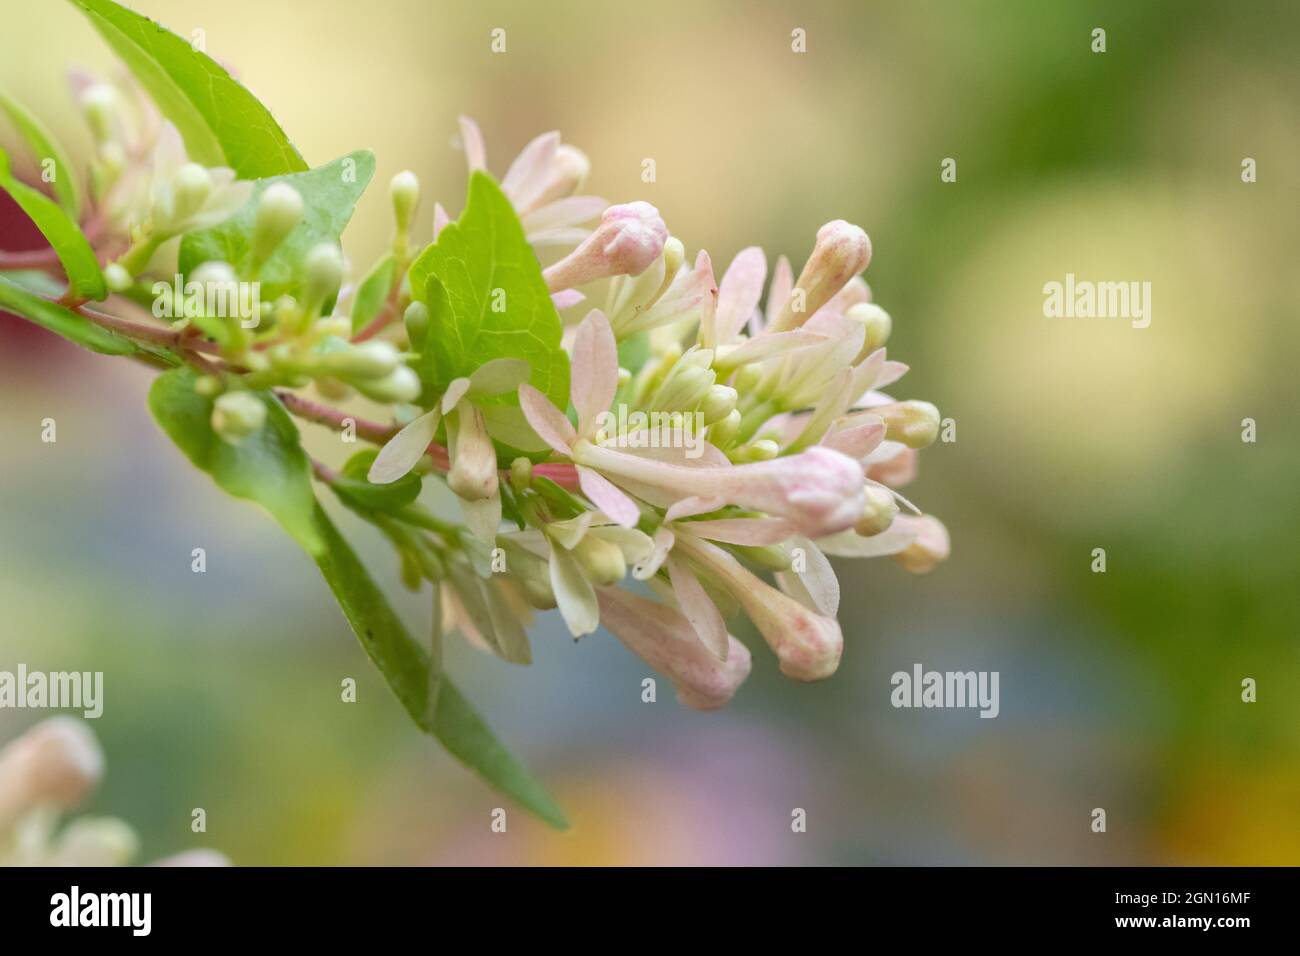 The delicate pink blooms of the abelia grandiflora shrub set against a muted background. Stock Photo